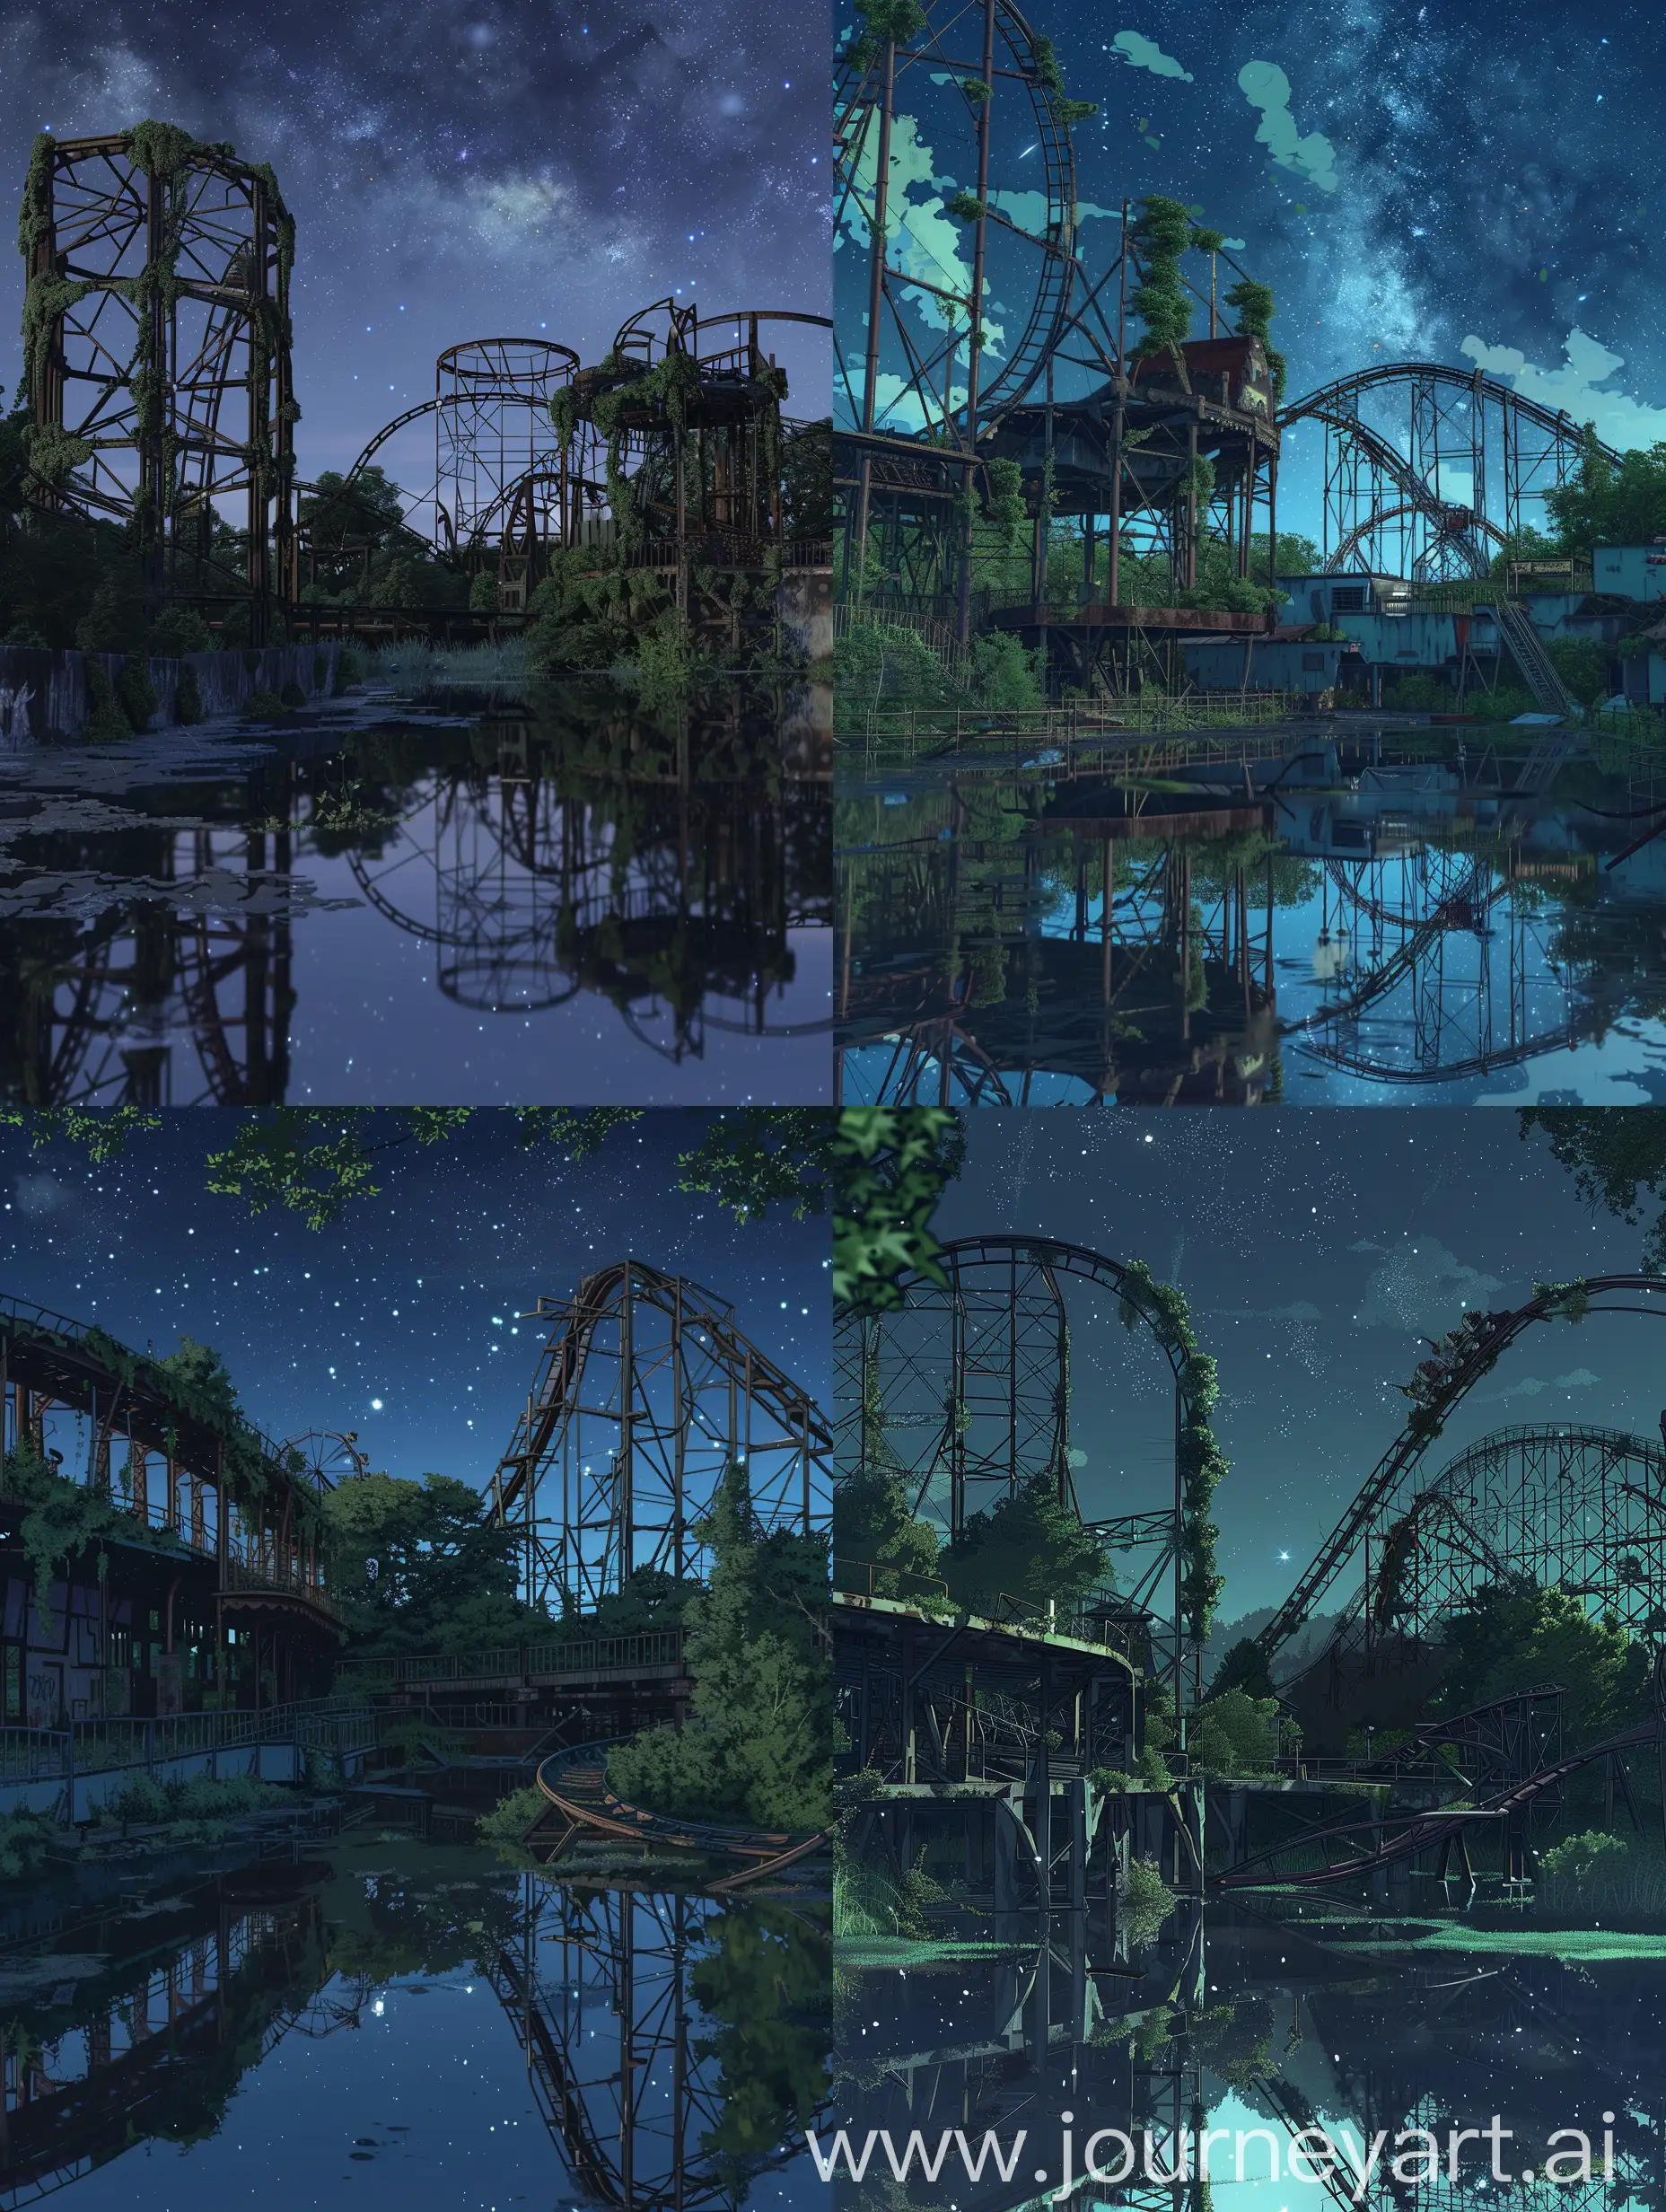 Eerie-Anime-Night-Scene-Abandoned-Amusement-Park-with-Rusting-Rides-and-Starlit-Sky